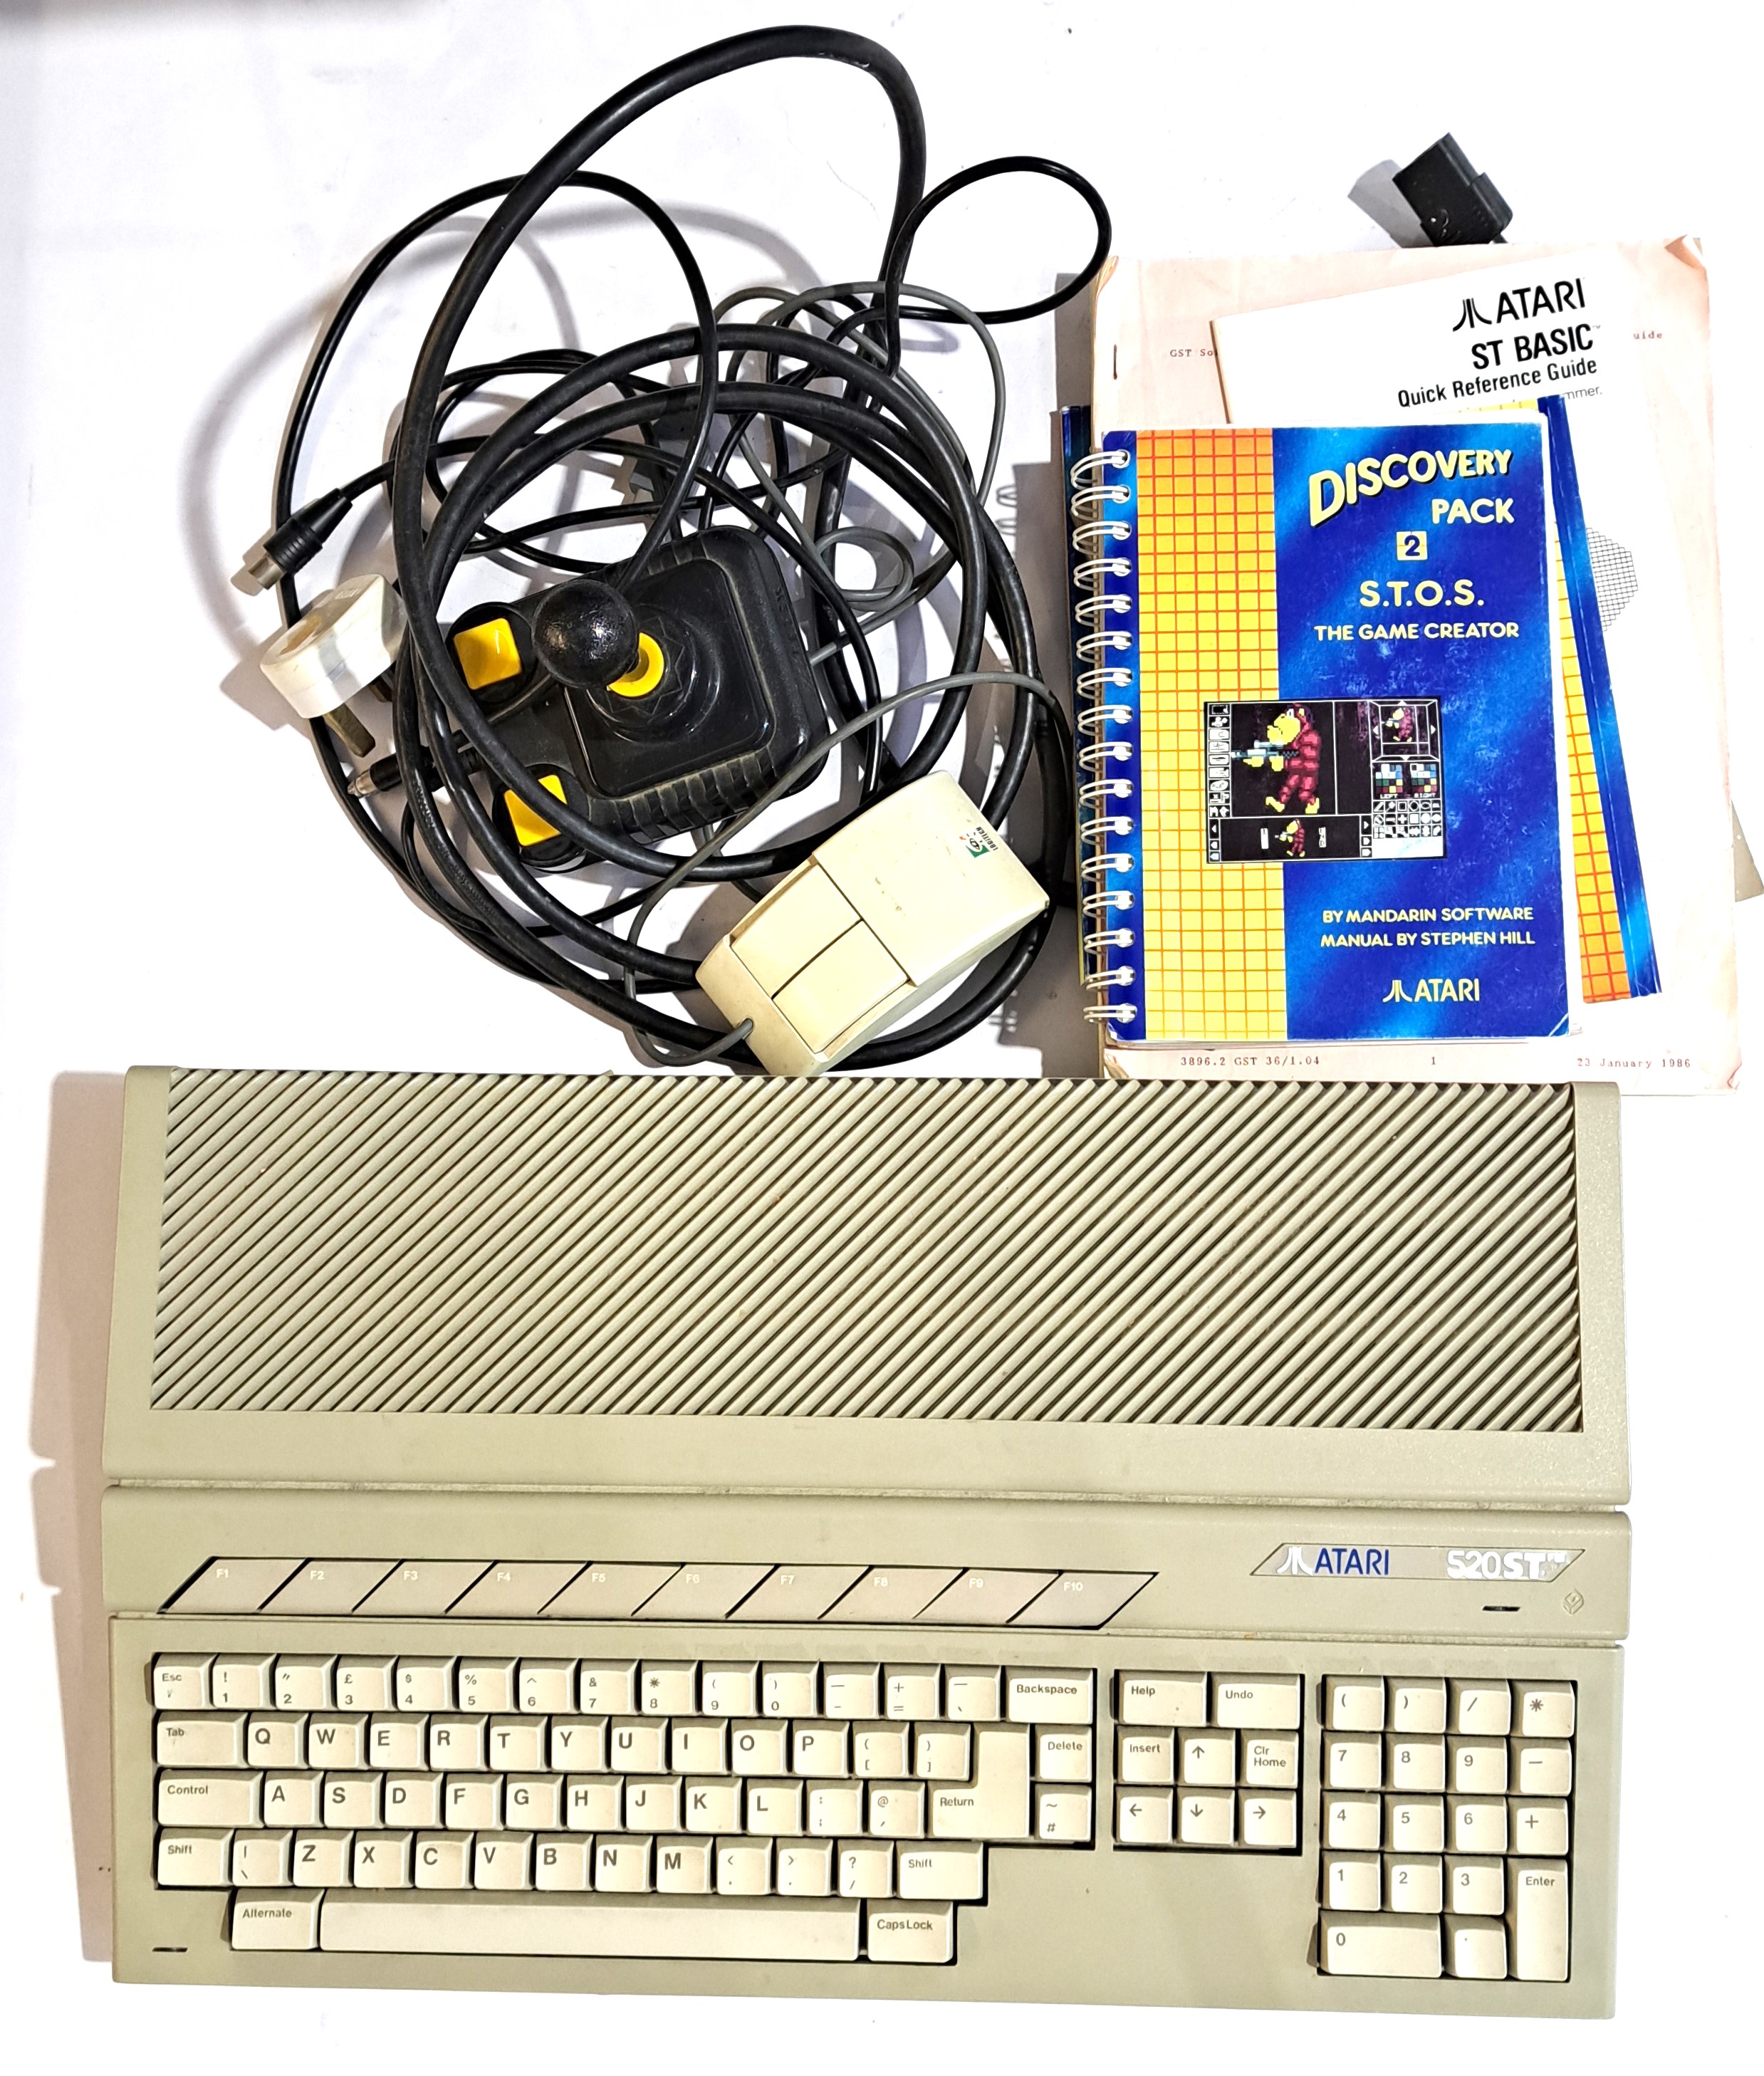 Vintage/Retro Gaming. A boxed Atari 520ST Games Console with Peripherals - Image 2 of 2